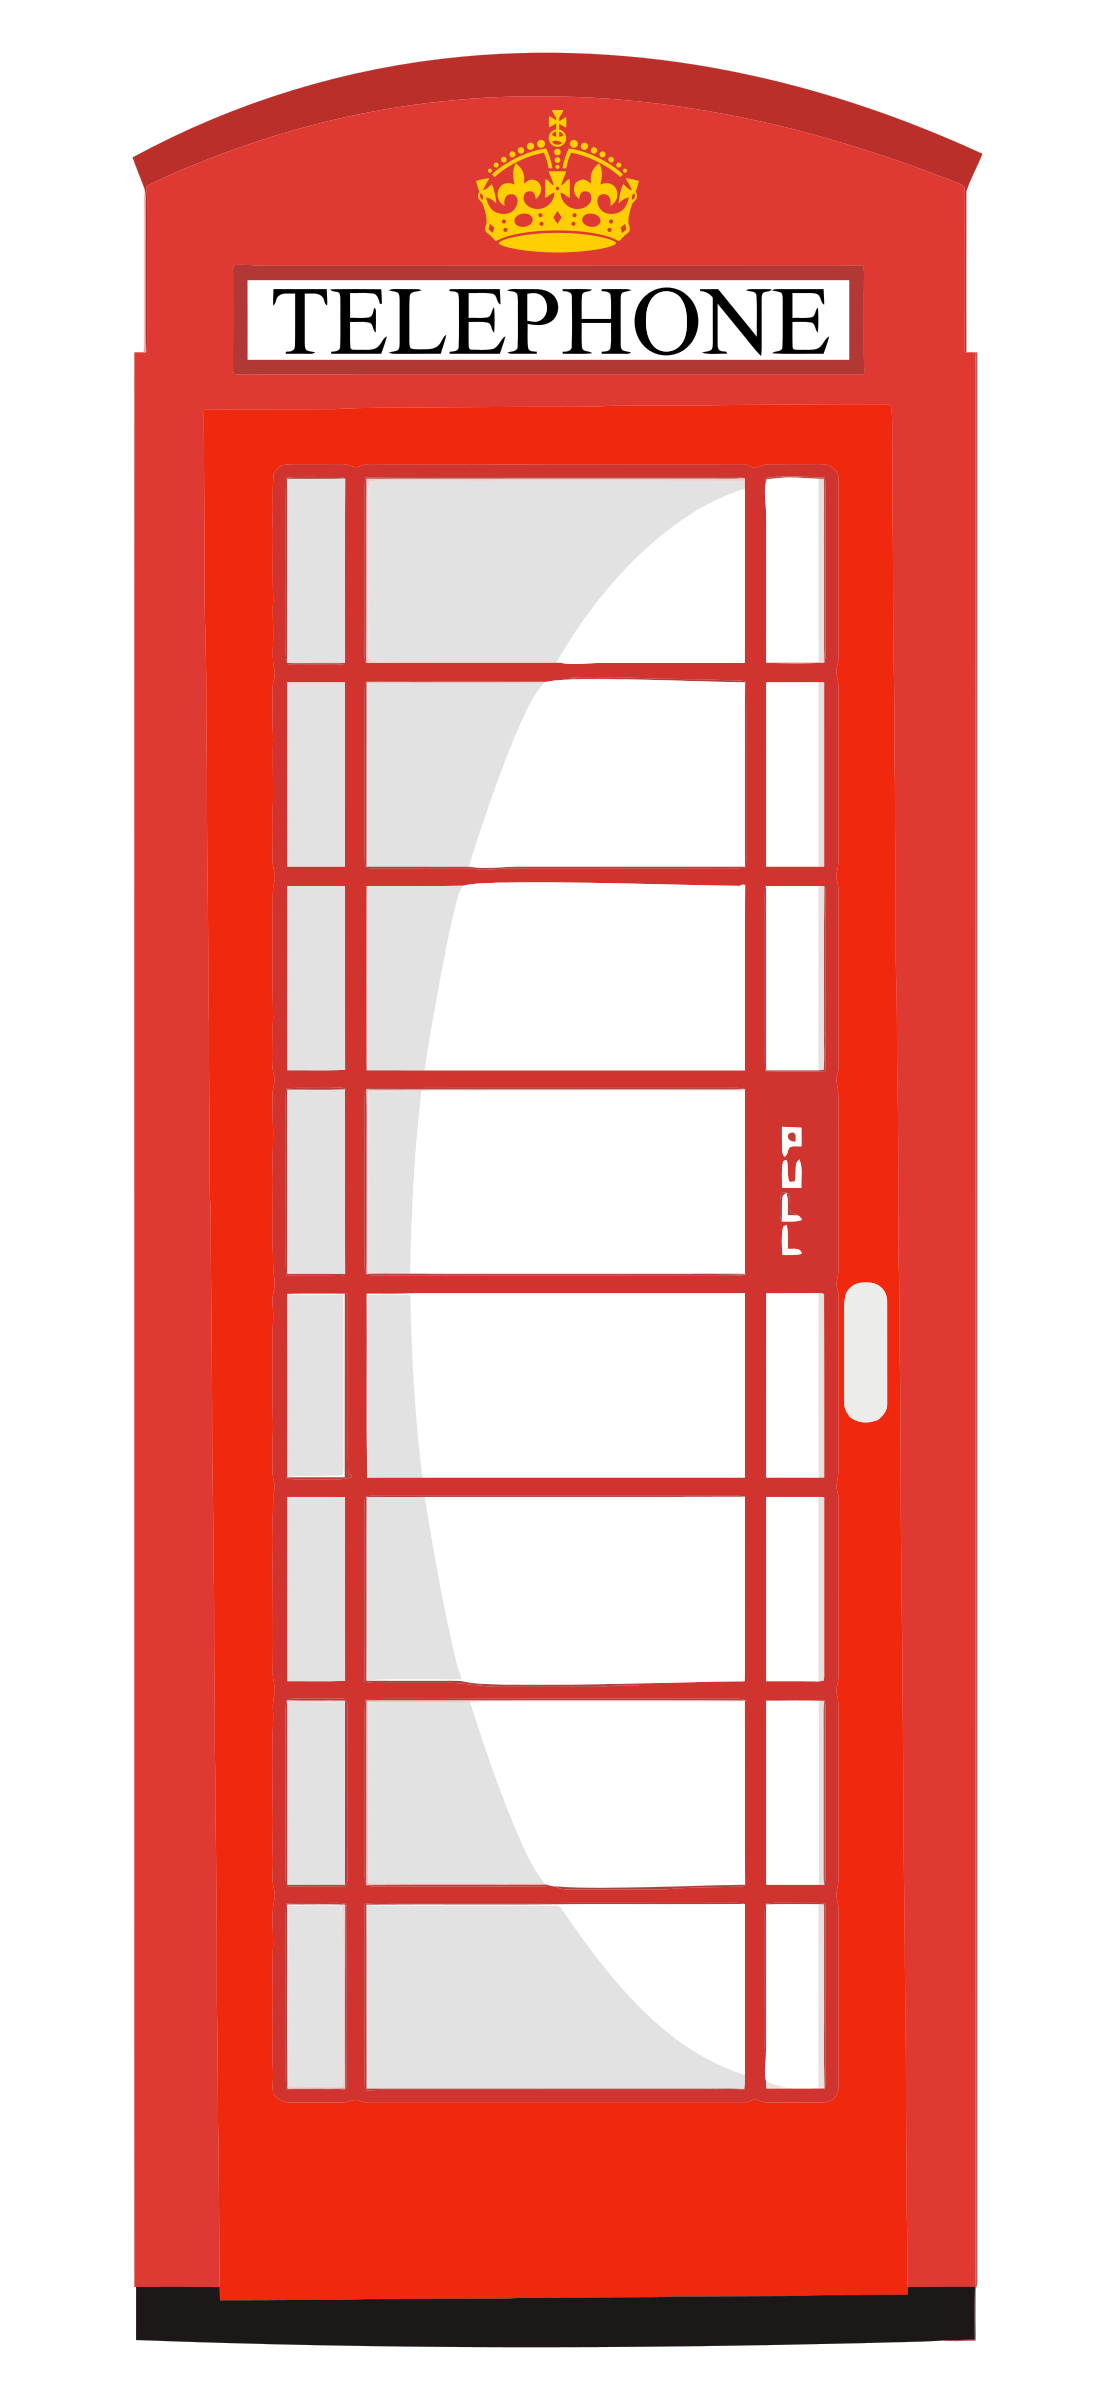 Telephone clipart red telephone. Box big image png